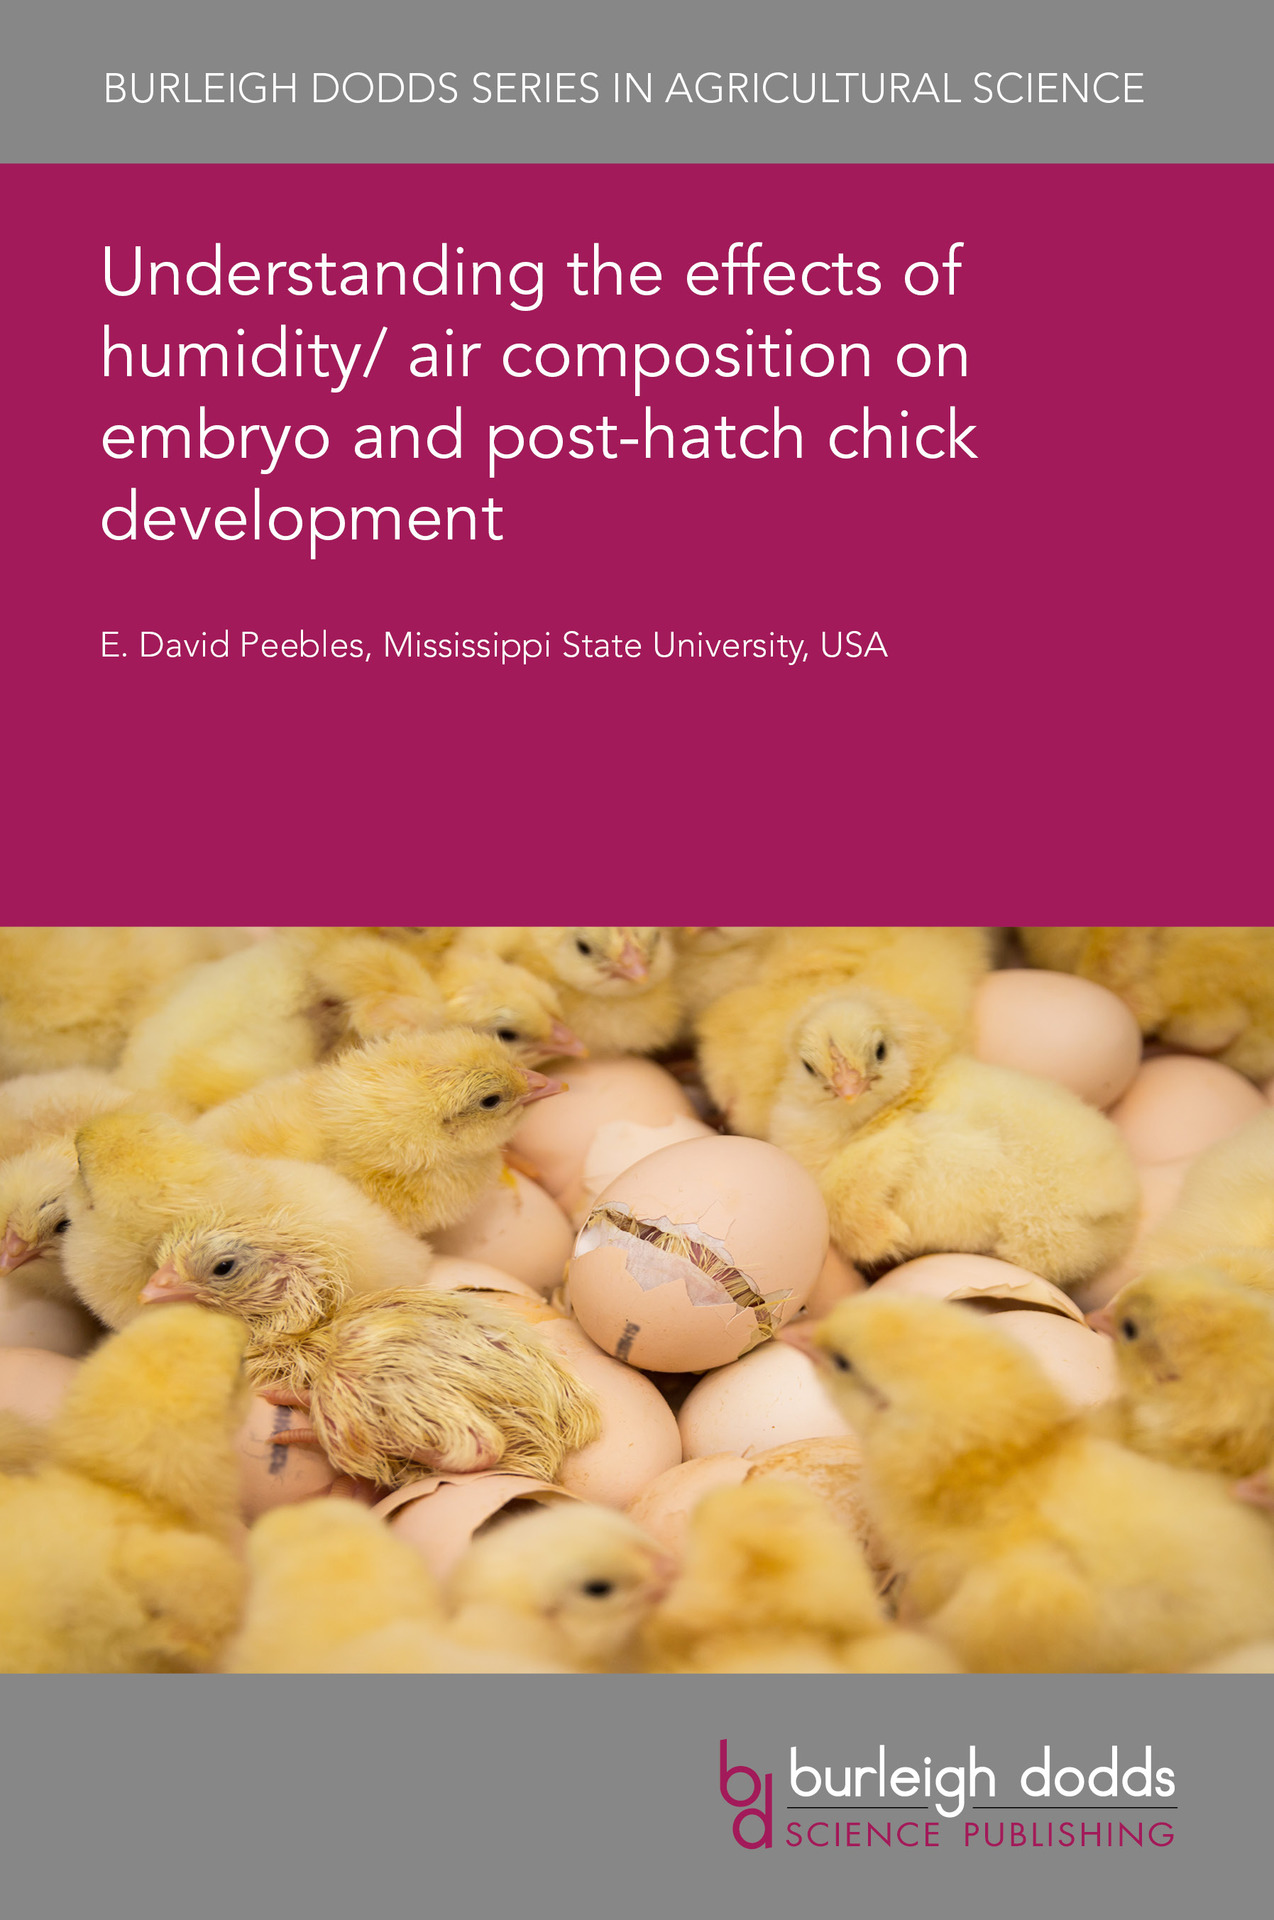 Understanding the effects of humidity/air composition on embryo and post-hatch chick development